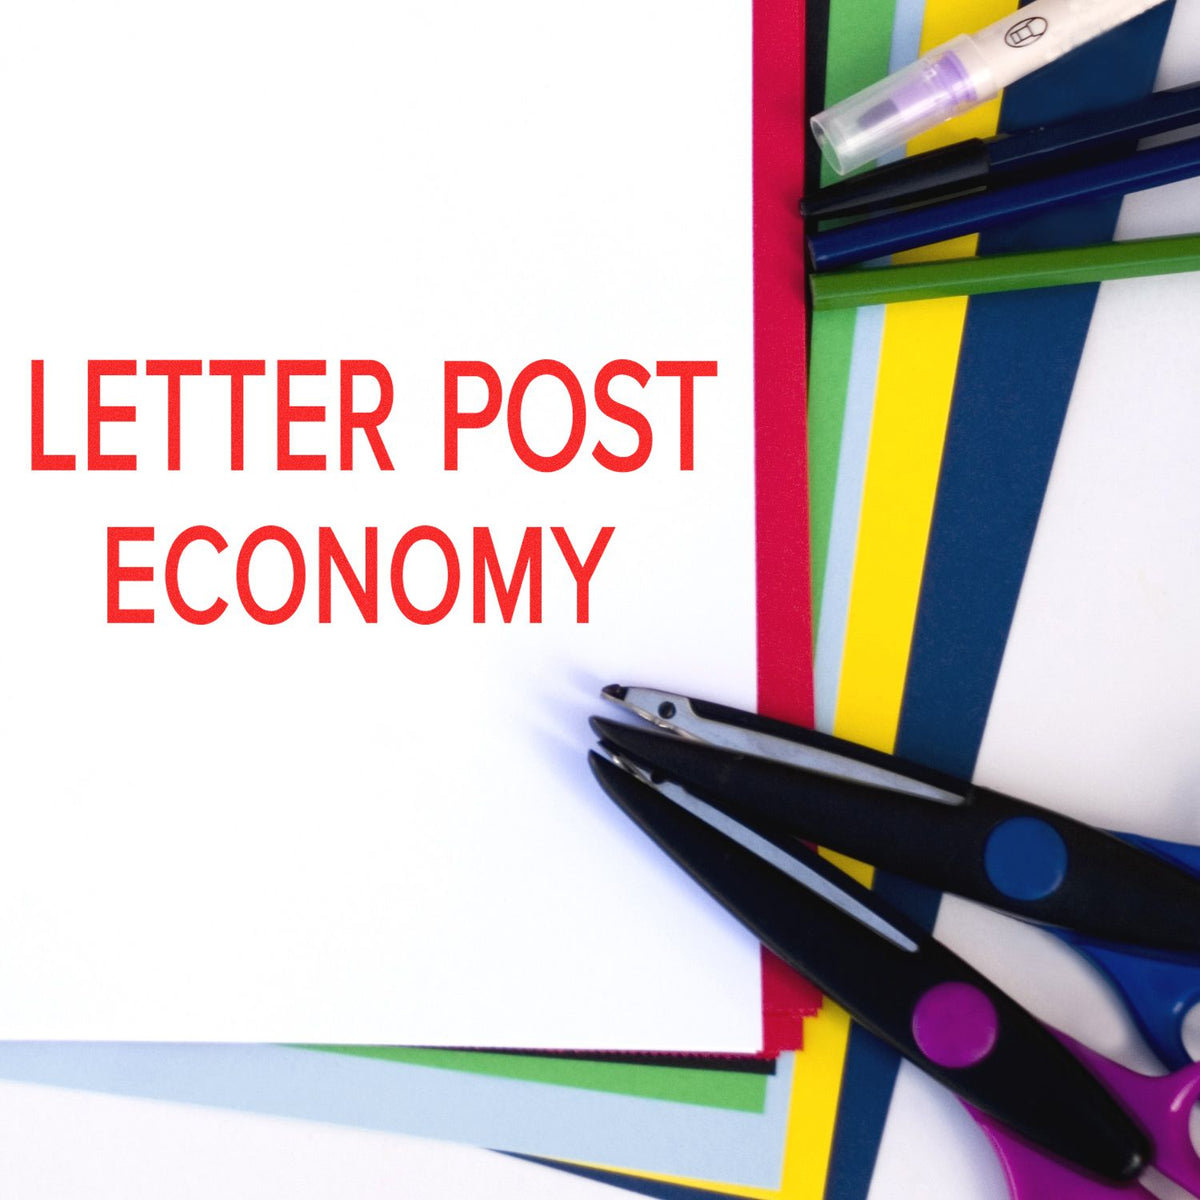 Letter Post Economy Rubber Stamp In Use Photo